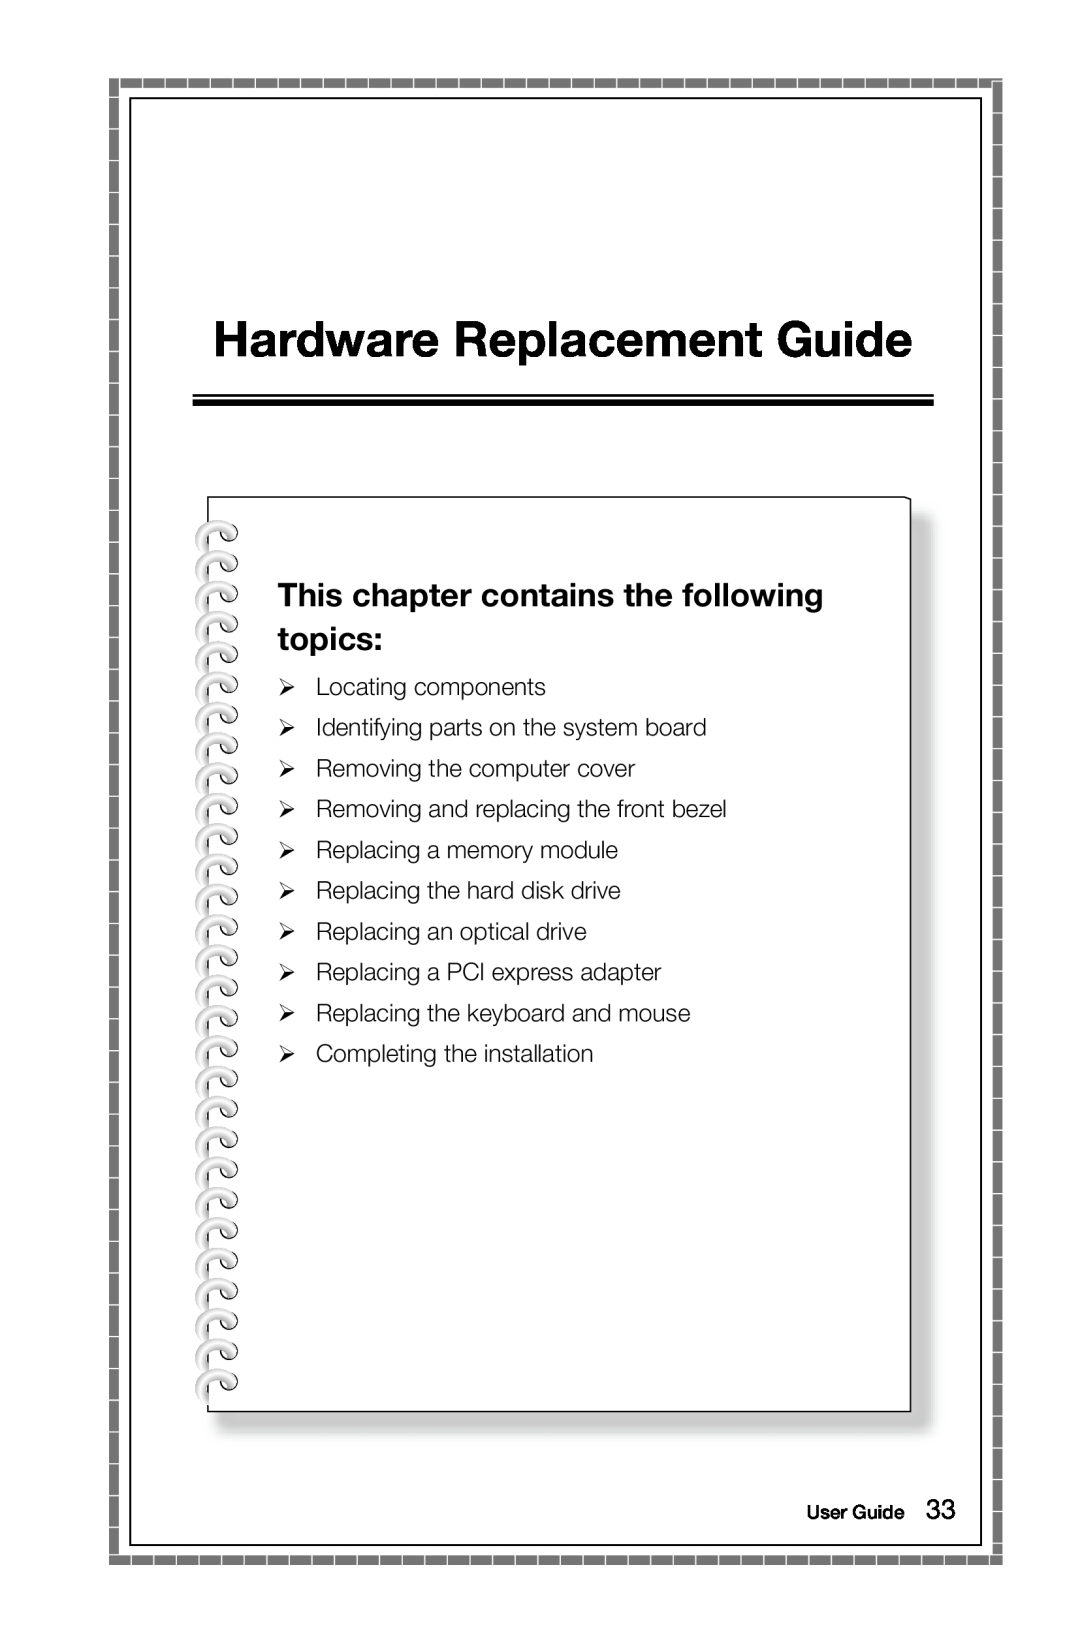 Lenovo 57321302 manual Hardware Replacement Guide, This chapter contains the following topics, User Guide 